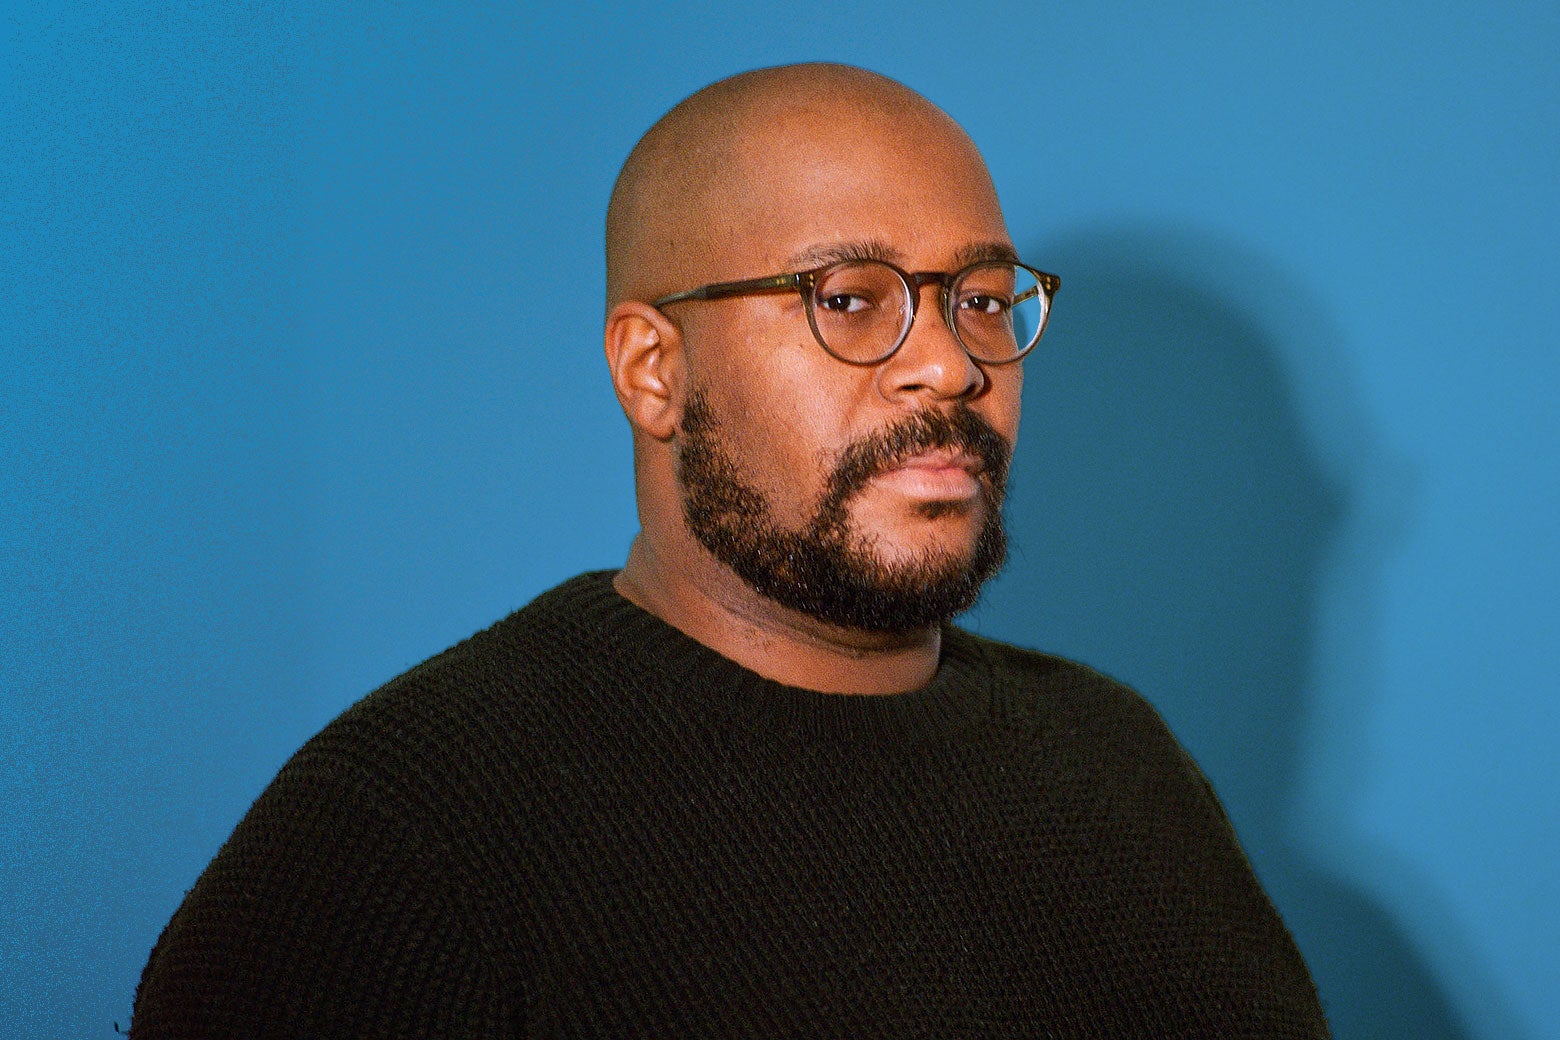 Writer Brandon Taylor, against a blue background, wears framed glasses and a black knit sweater.